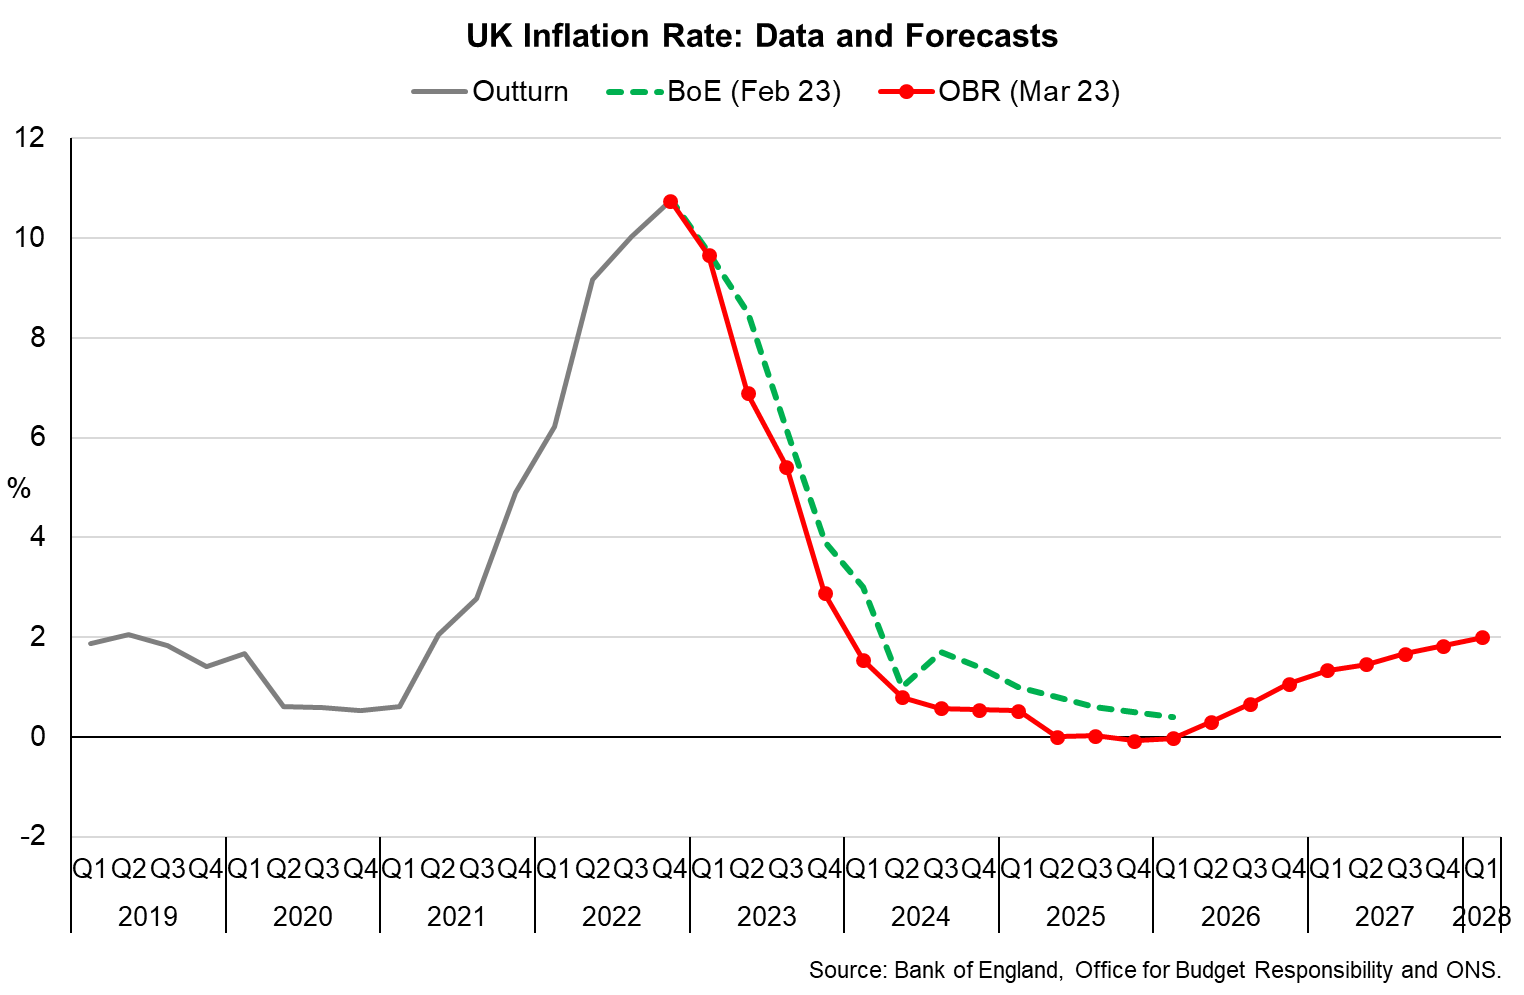 Chart showing a time series between Quarter 1 2019 to Q1 2018 of Outturn, Bank of England, and OBR inflation forecasts. Outturn inflation increases from around 2% in Quarter 2 2019 to 10.7% in Quarter 4 2022. The Bank of England (February 2023), and OBR (March 2023) lines show a decrease from 10.7% for the remaining years. In the OBR line it increases again from 0% at Q4 2025 to around 2% by Q1 2028.